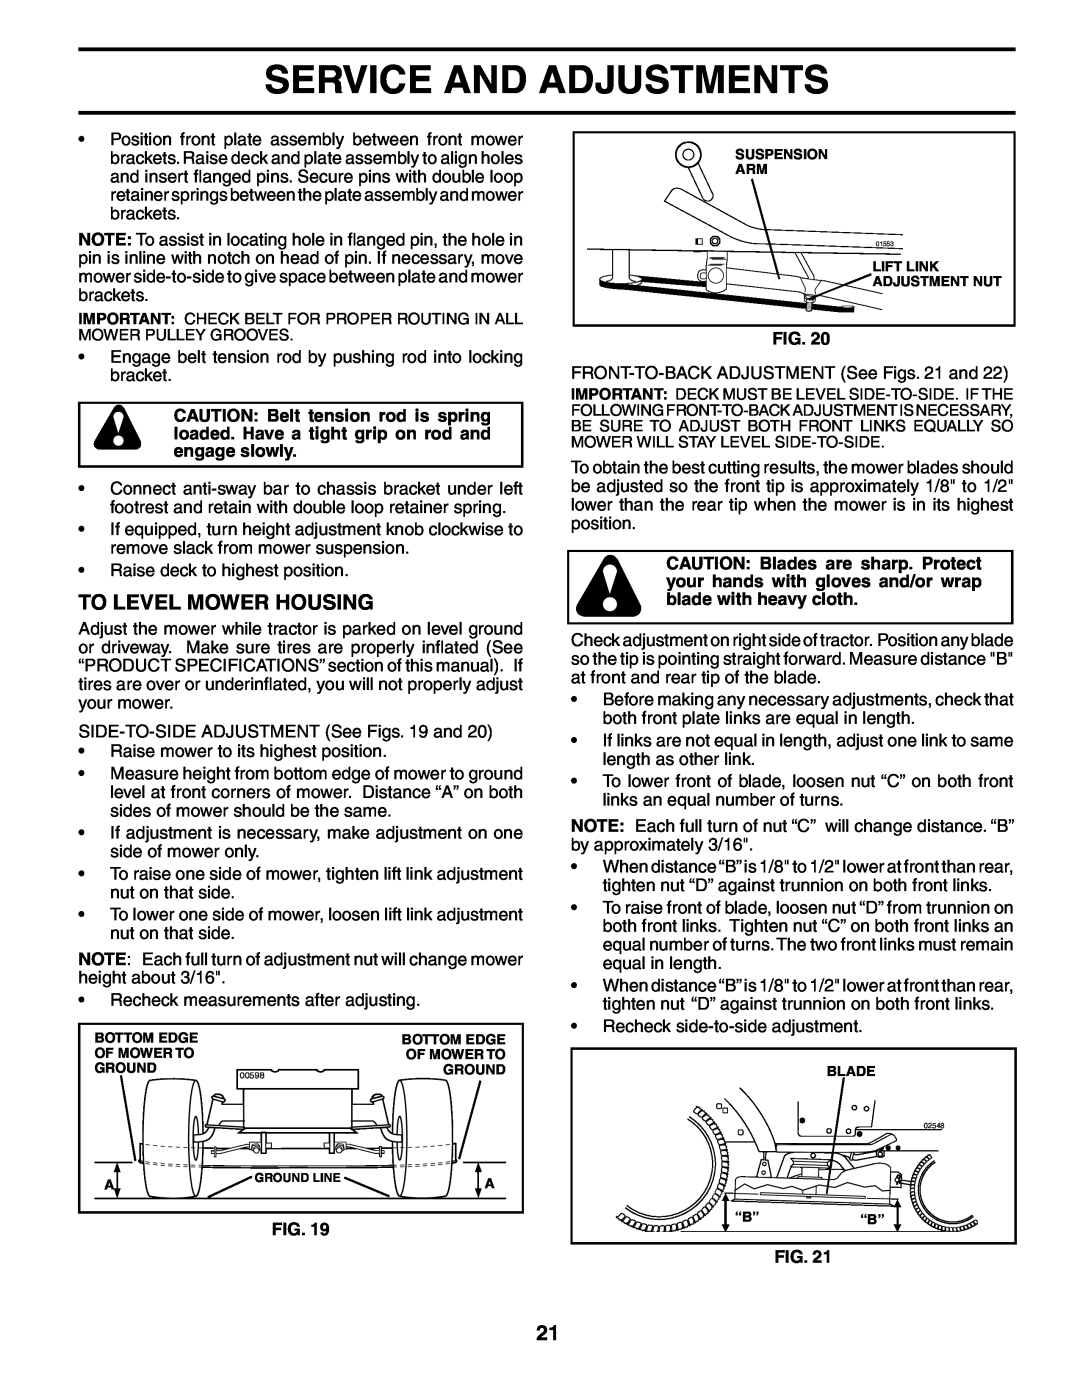 Poulan DB27H48YT manual To Level Mower Housing, Service And Adjustments, Fig 